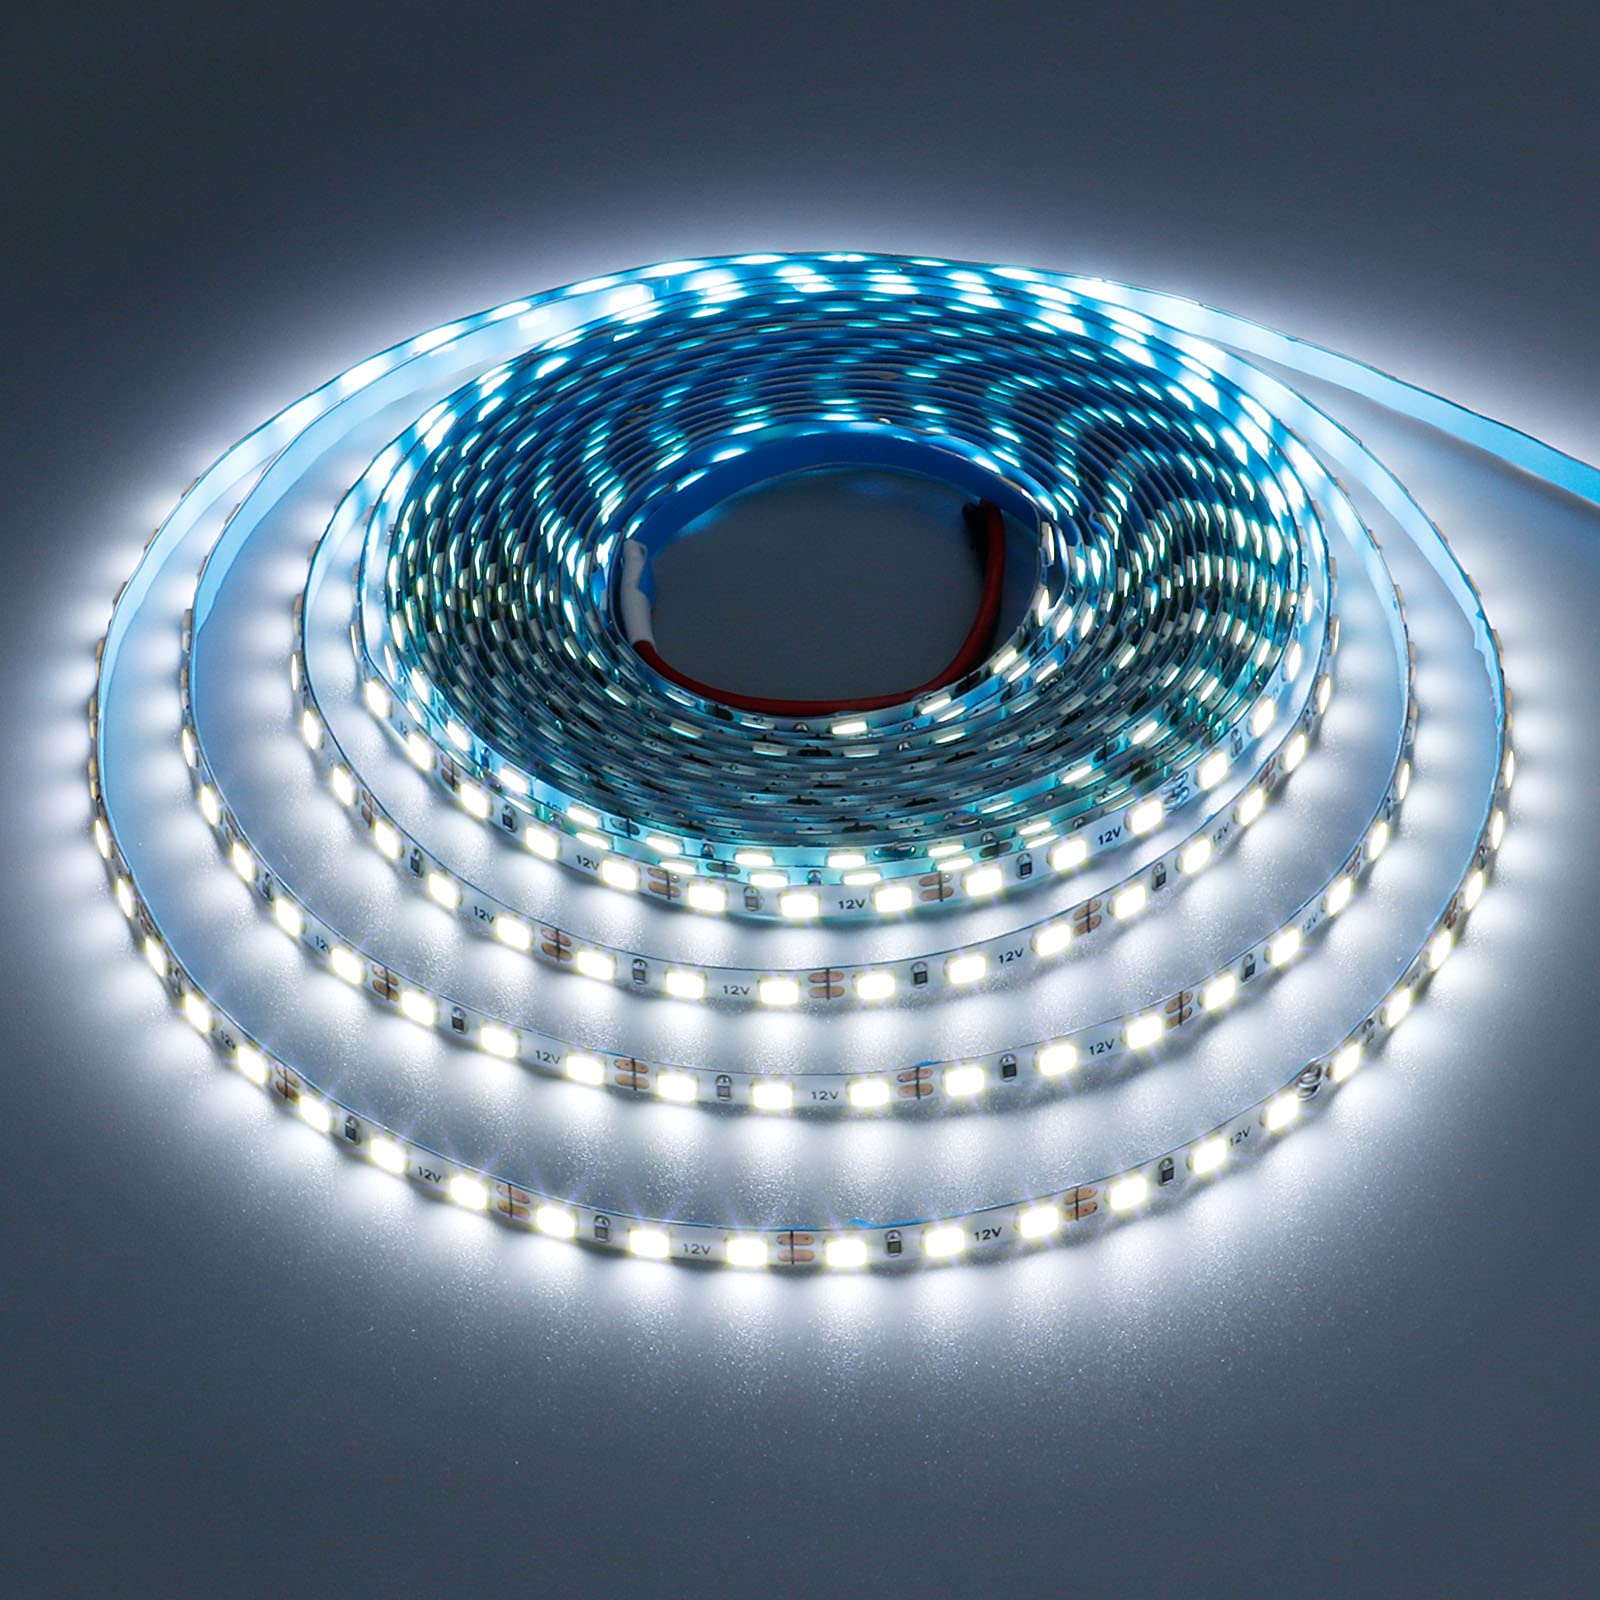 How to repair led strip lights?